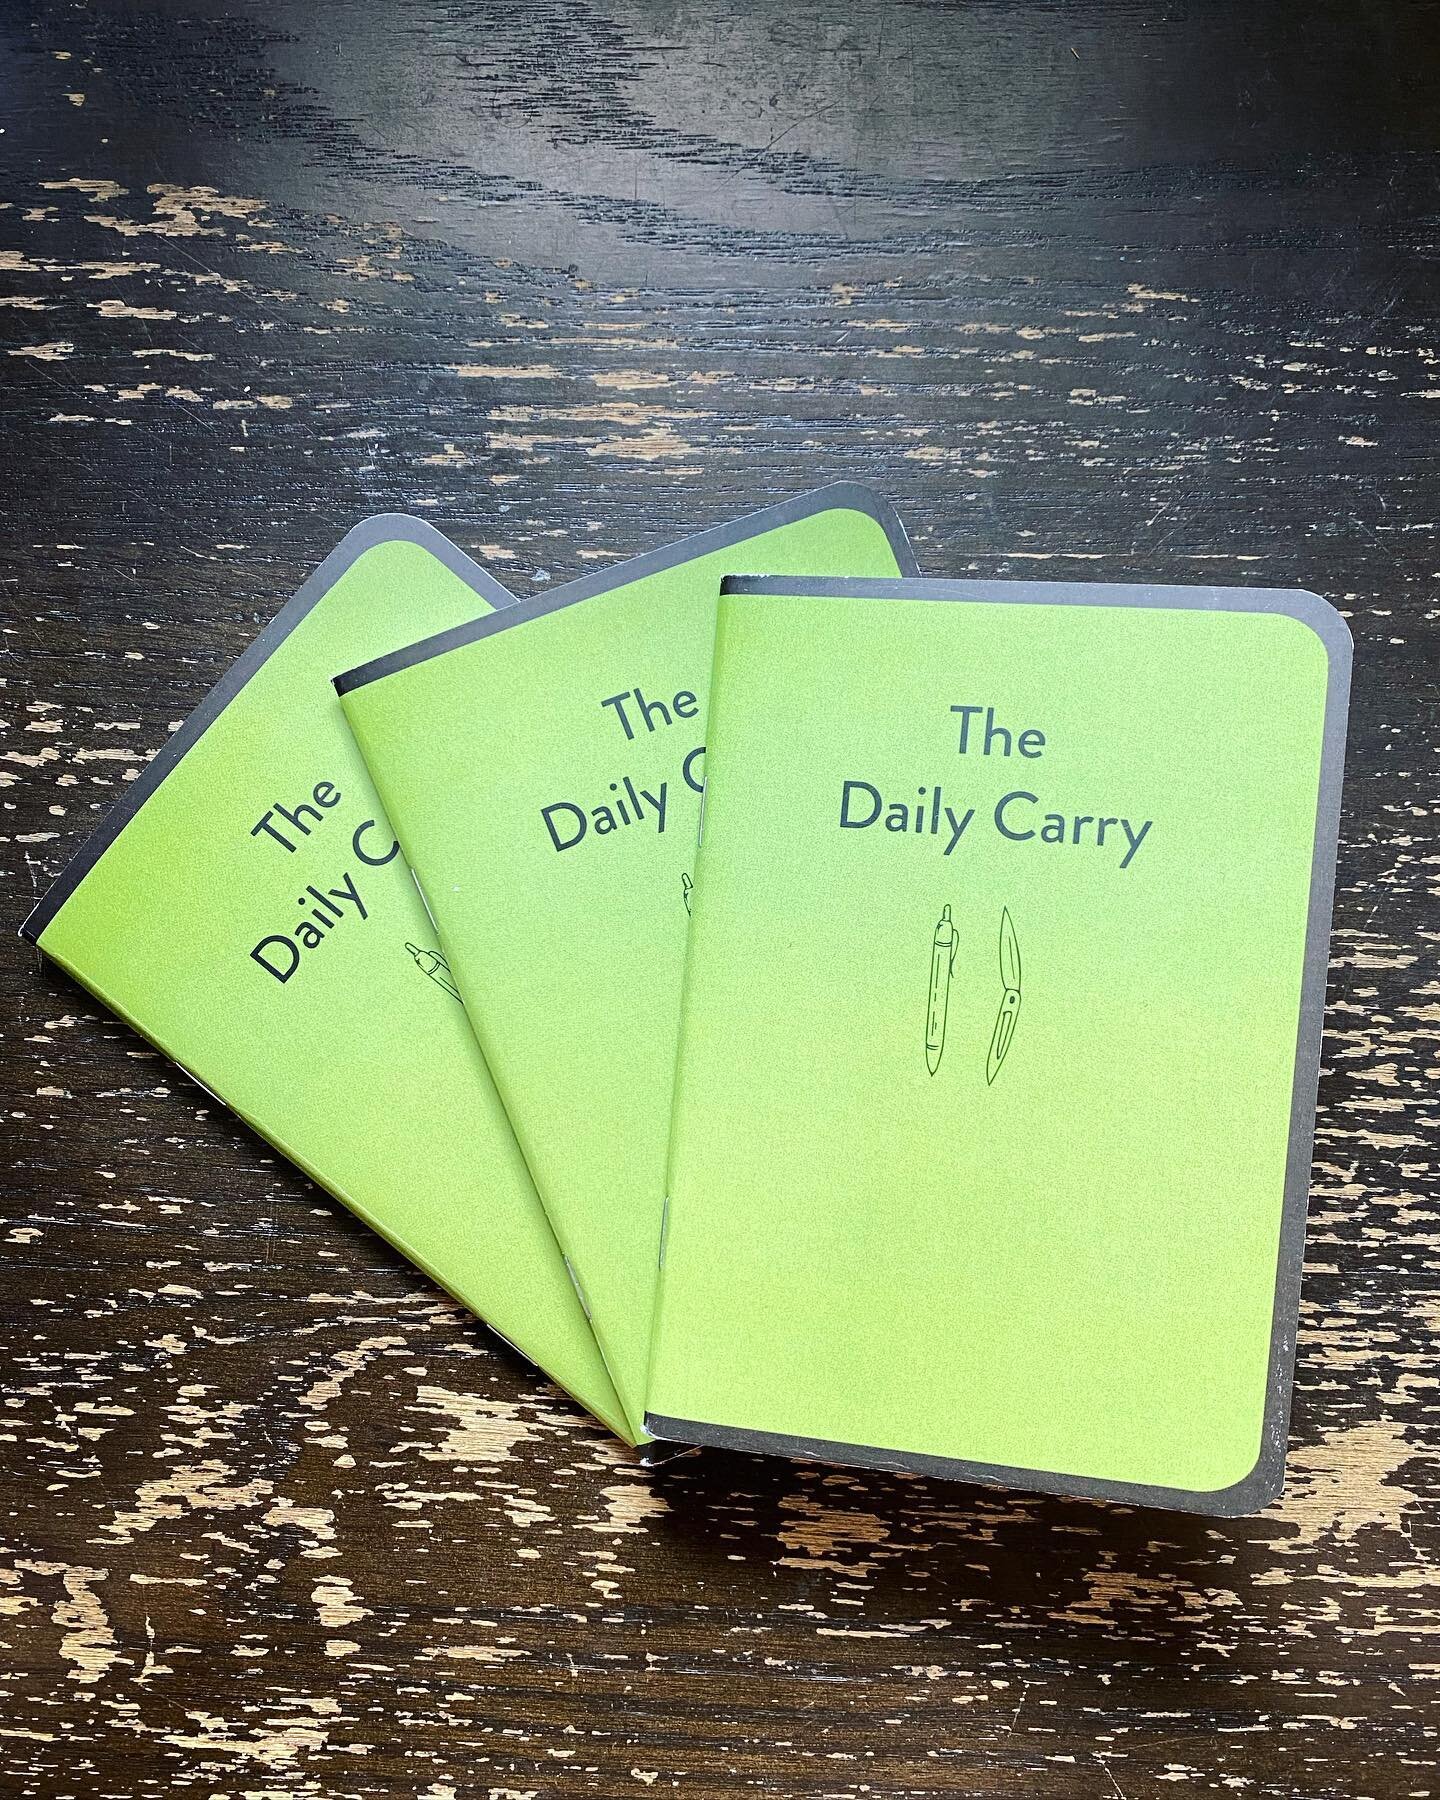 Here they are! The Daily Carry, for all your written needs - link in bio
&bull;
&bull; $20 for a 3pk
&bull; $8 for a single
&mdash;&mdash;&mdash;&mdash;&mdash;&mdash;&mdash;&mdash;-
&bull; Cover: 14 pt Matte Card Stock
&bull; Interior: 60 lb Uncoated